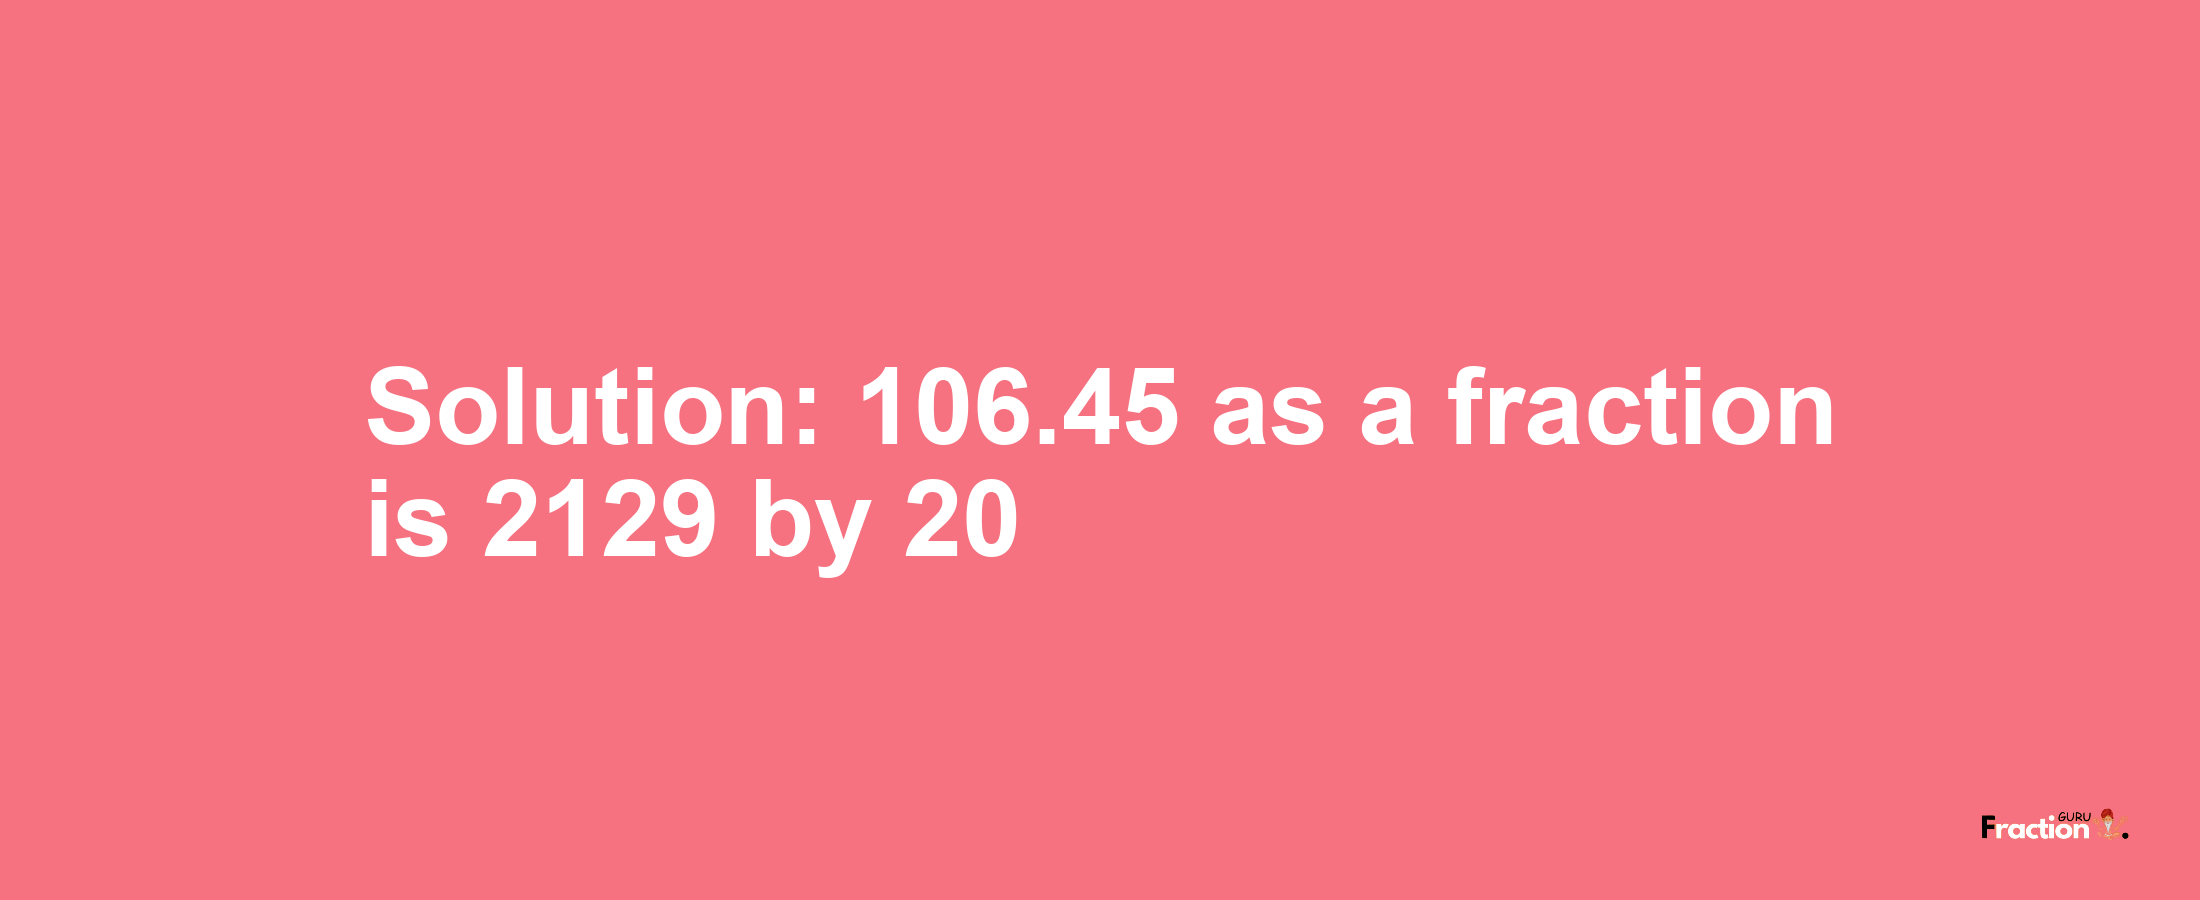 Solution:106.45 as a fraction is 2129/20